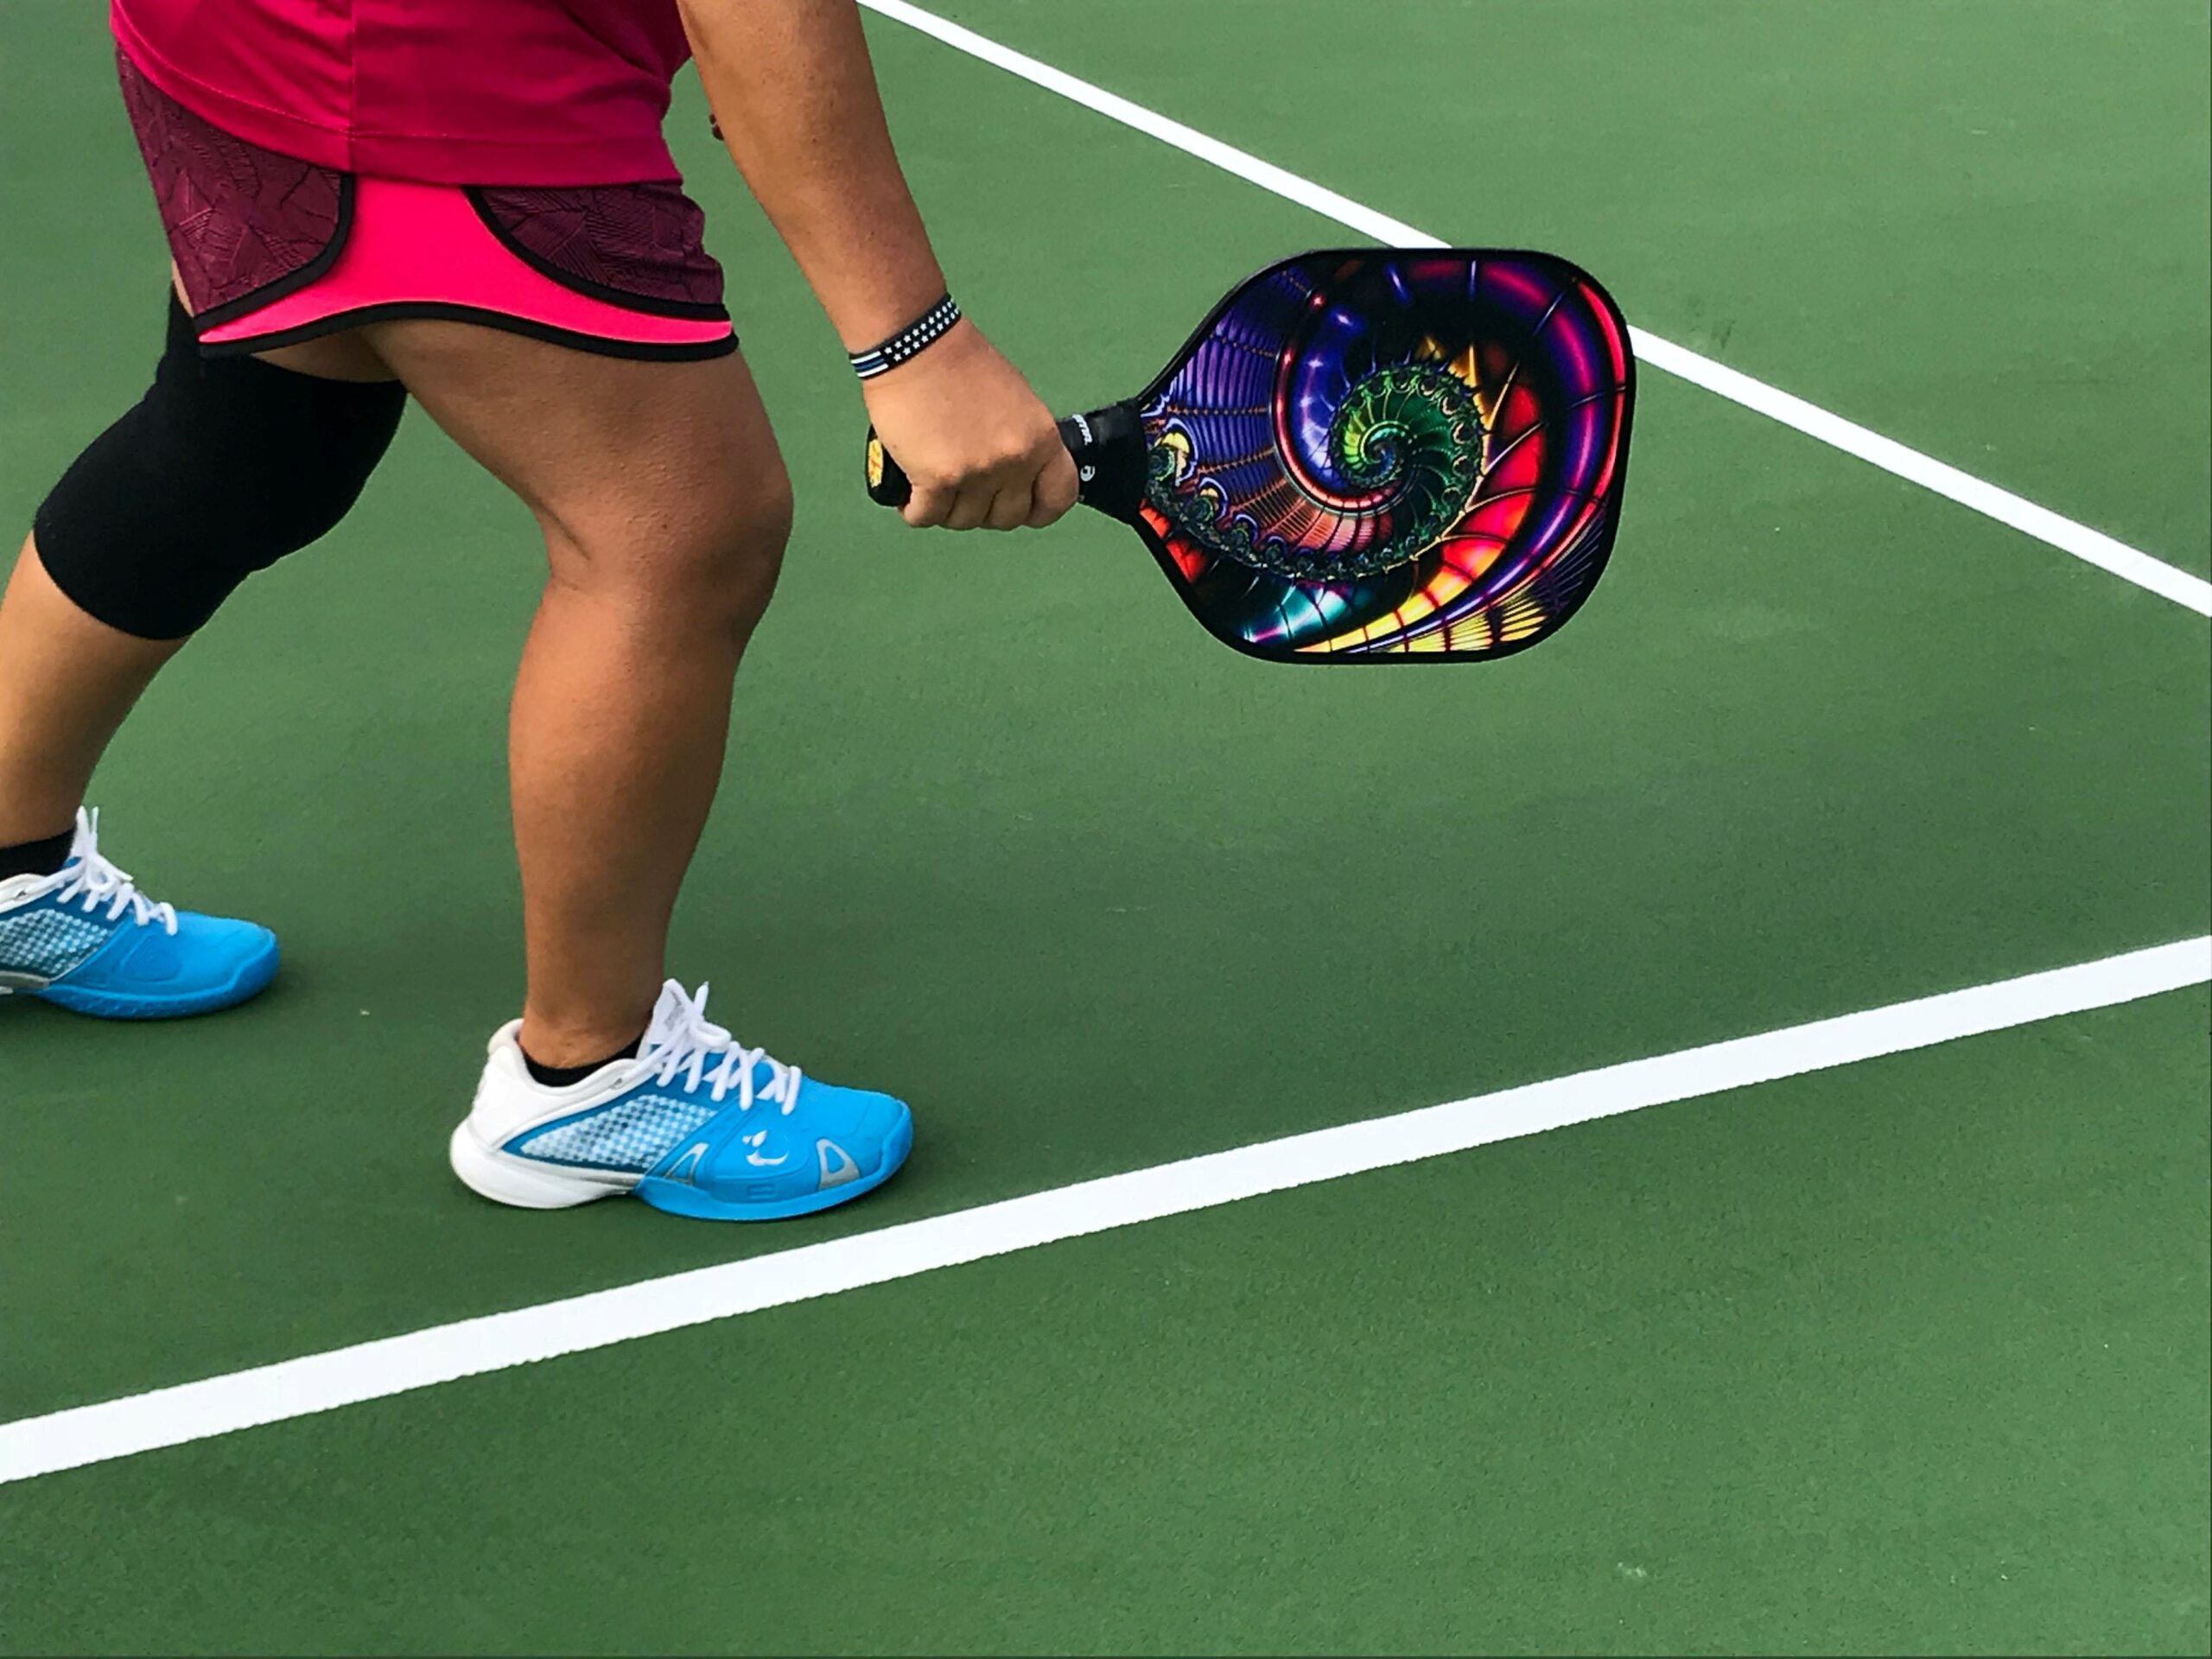 Discover Pickleball in Canada: Rules, Where to Play, and Benefits